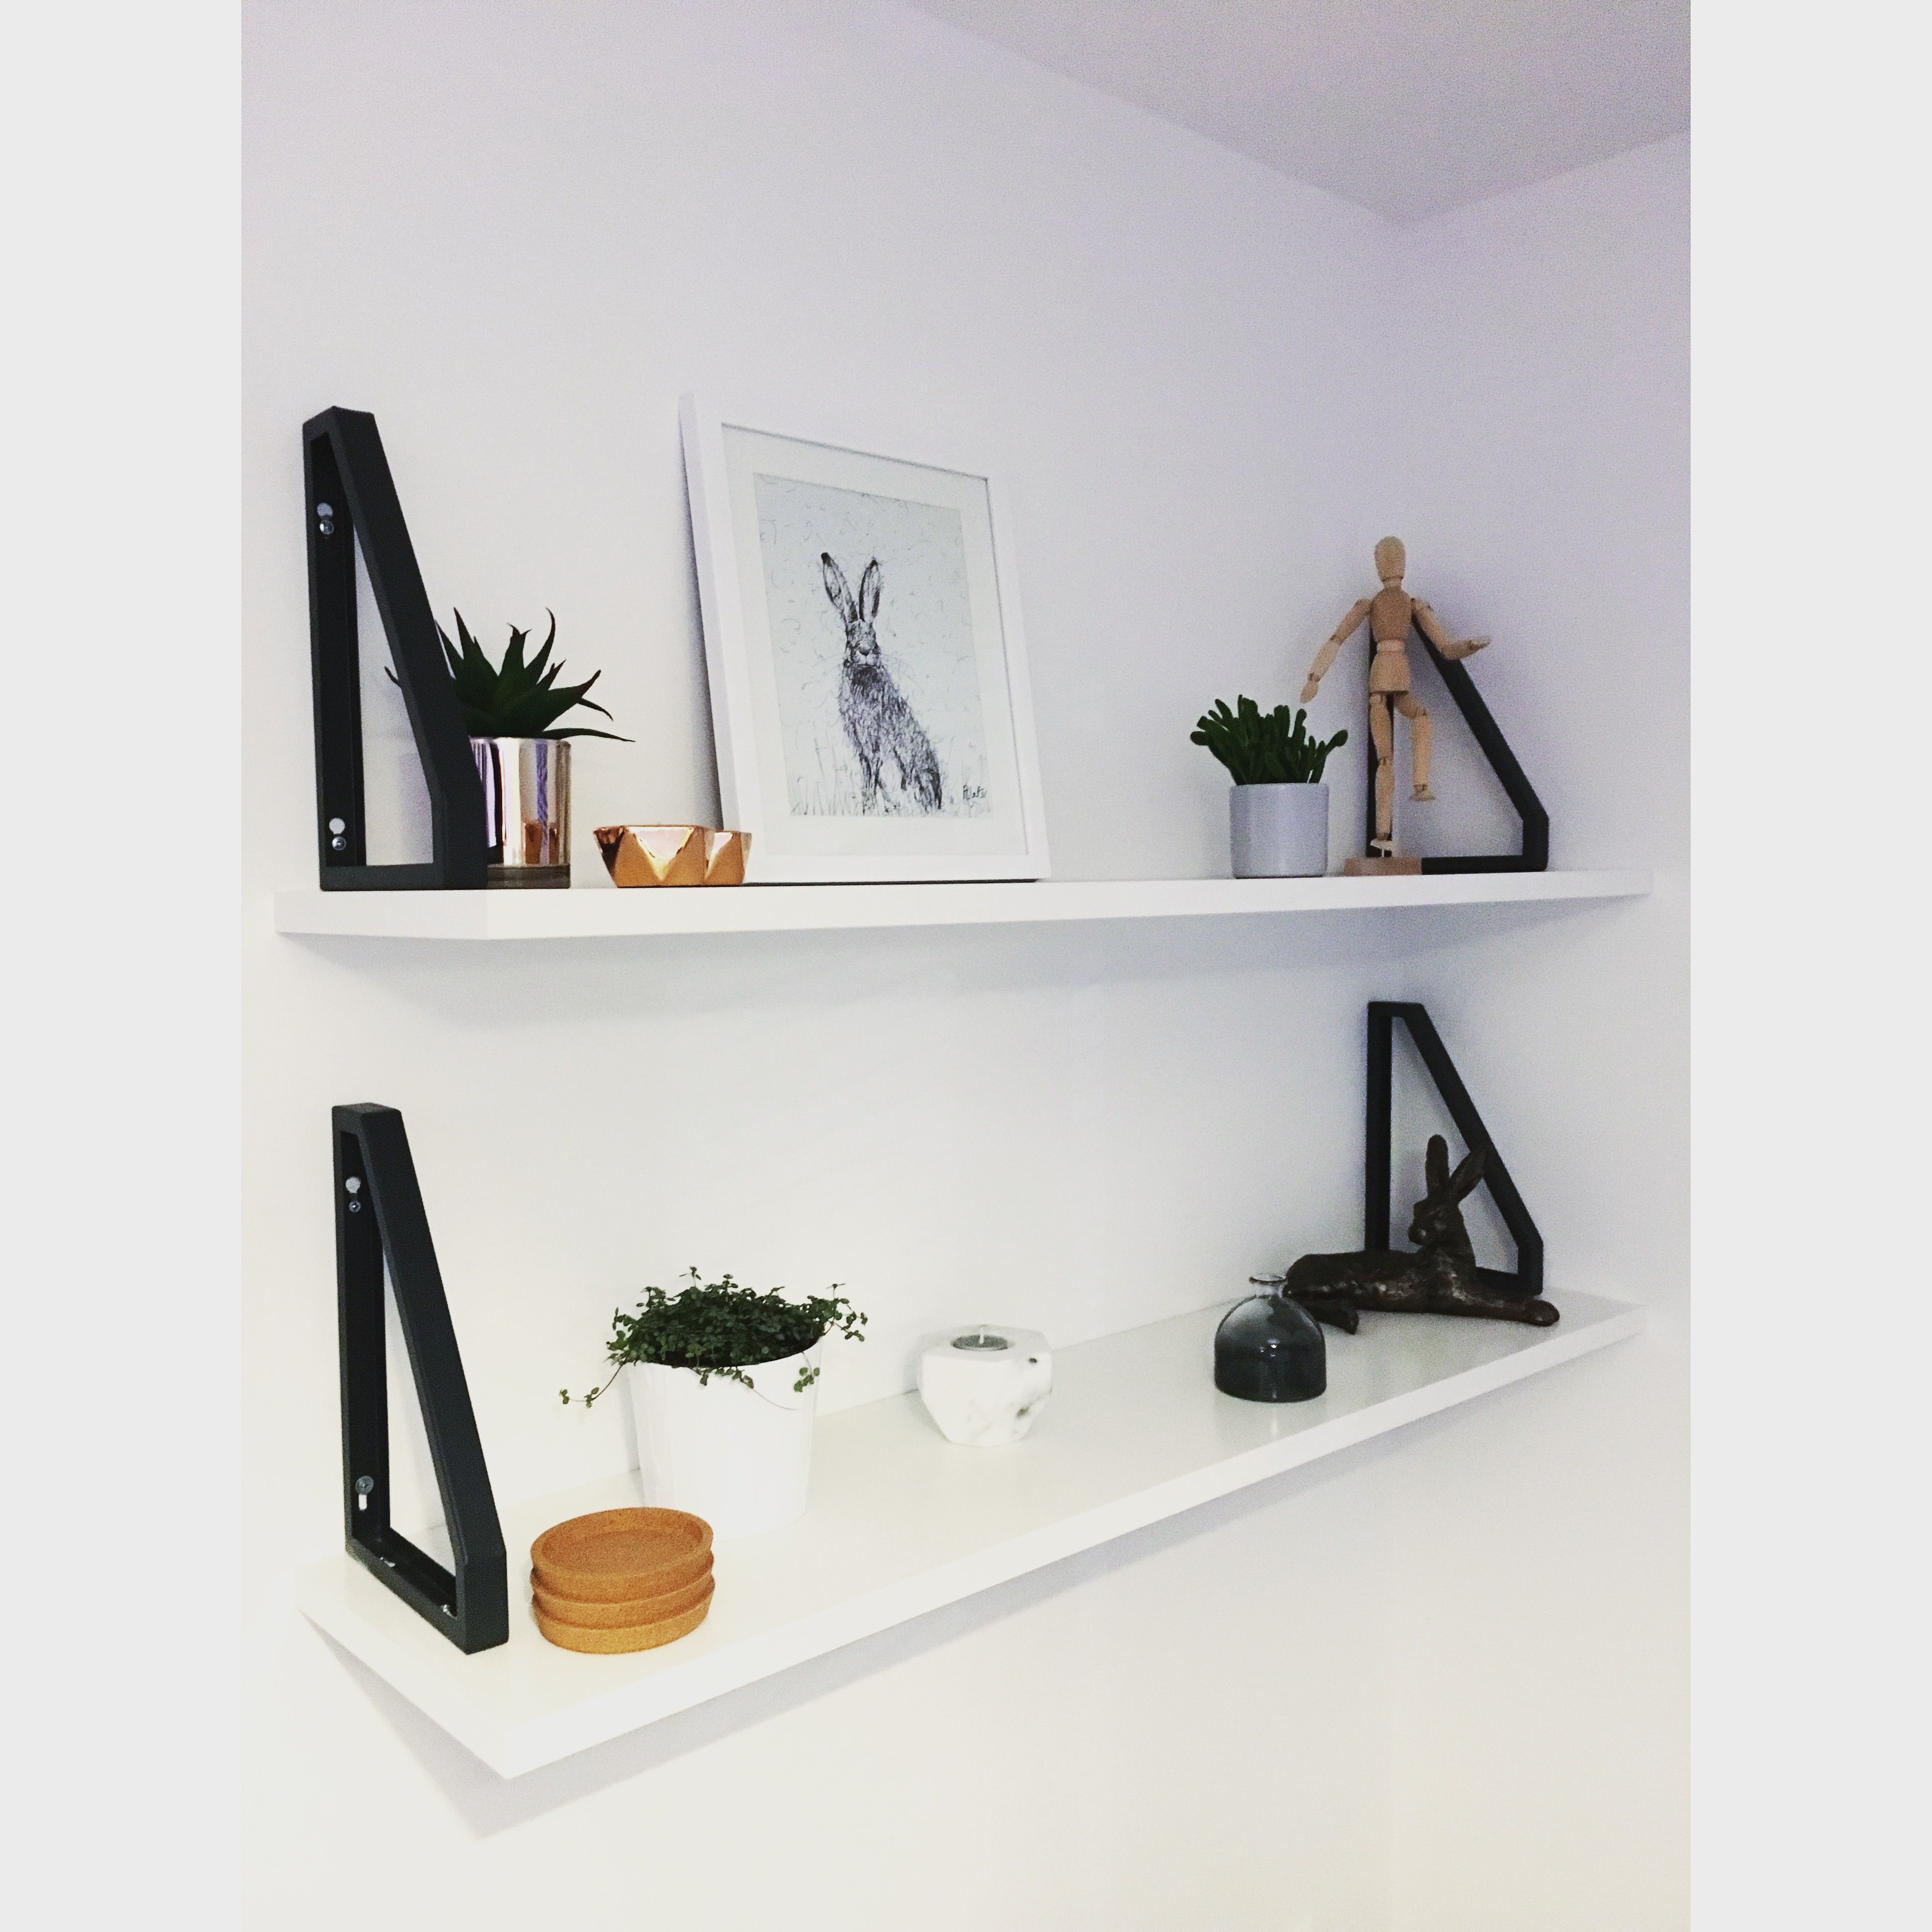 ikea hack ekby jarpen shelves with lerberg brackets placed best floating shelf top white cube storage unit wooden sydney big wall steel granite shadow box office built ins clothes